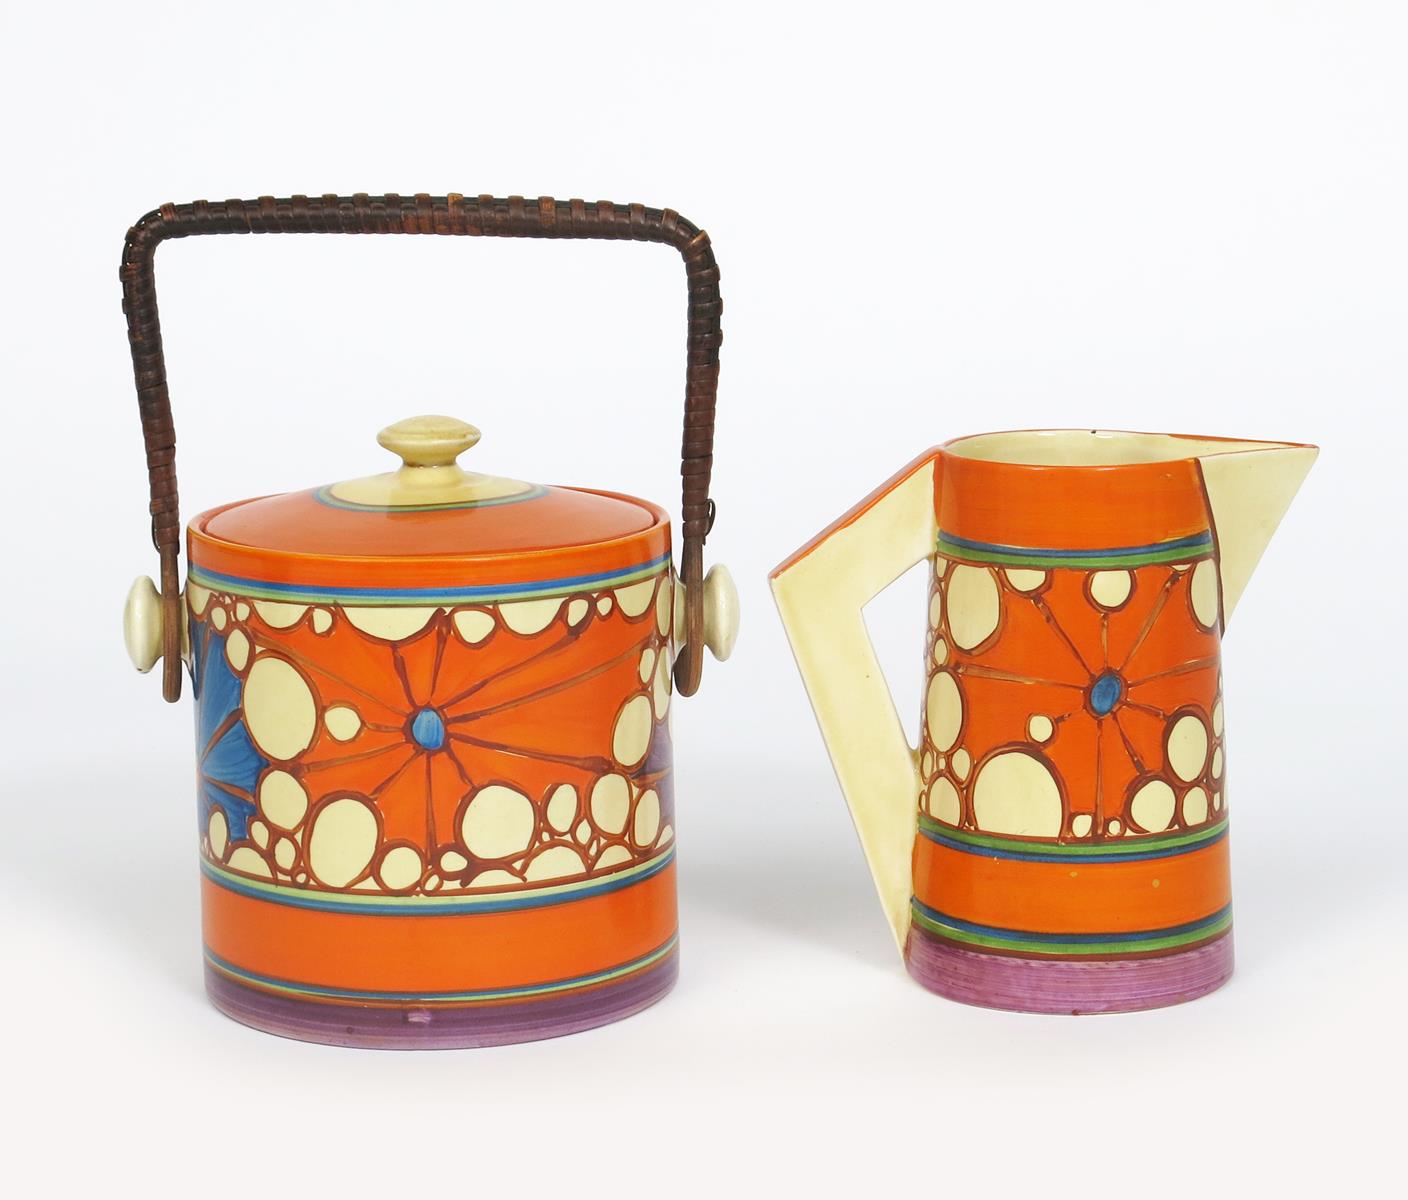 'Broth' a Clarice Cliff Fantasque Bizarre Cylindrical Biscuit barrel and cover and a Conical jug,